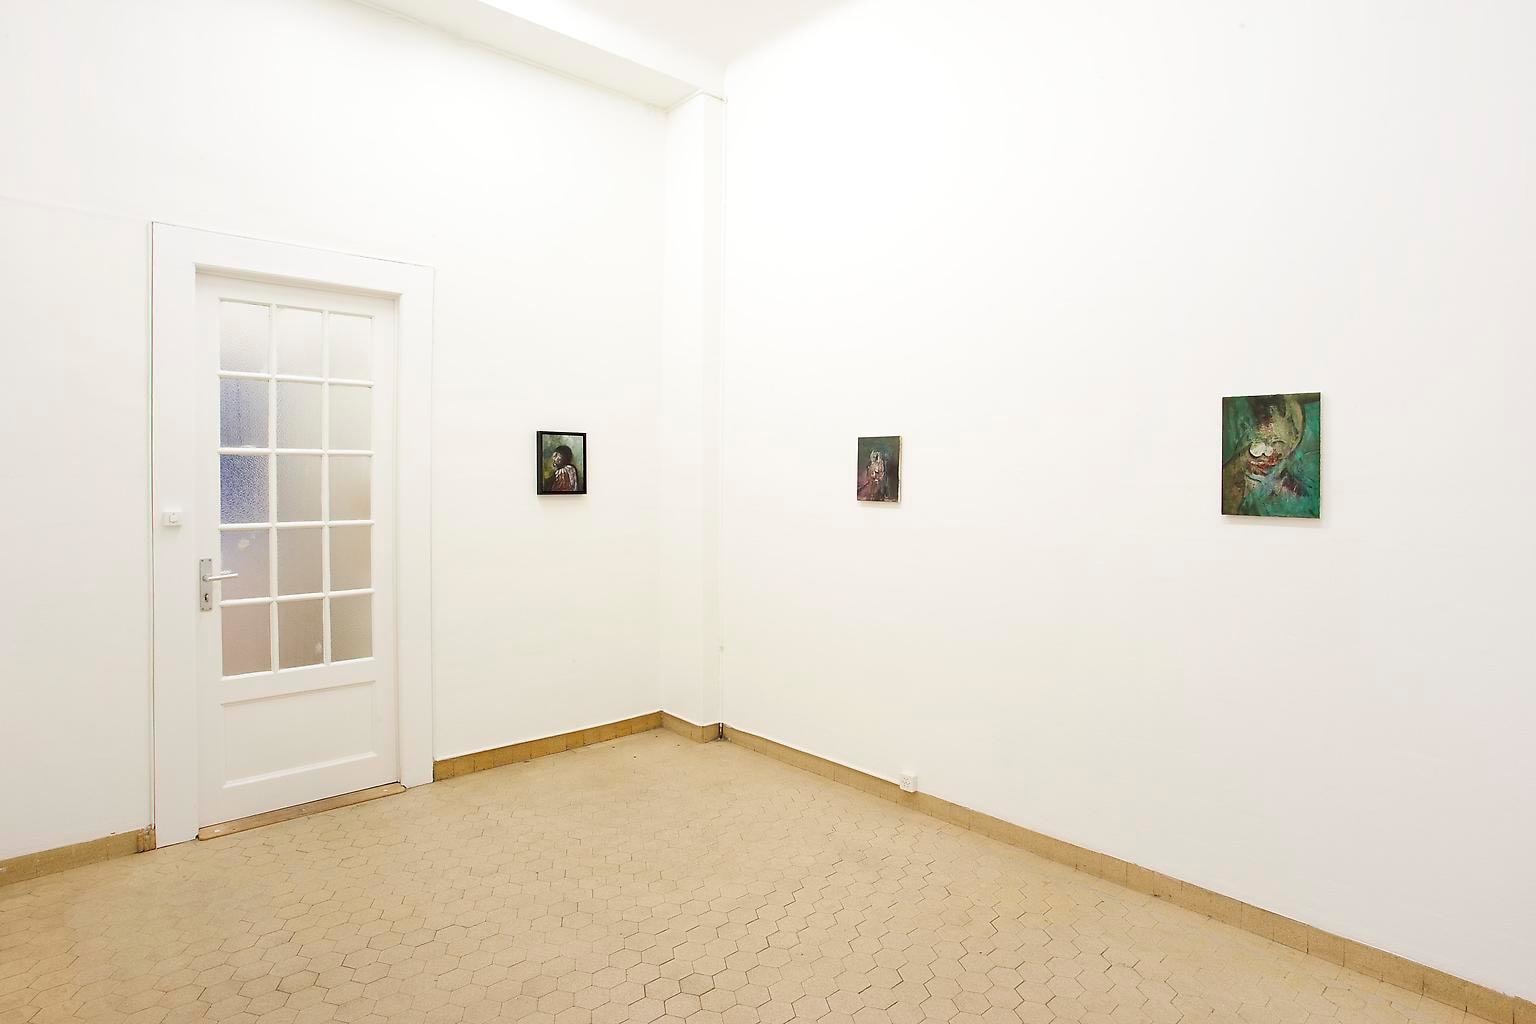  Installation view, Ross Chisholm, The Garden, Marc Jancou, Geneva, January 19 - March 10, 2012